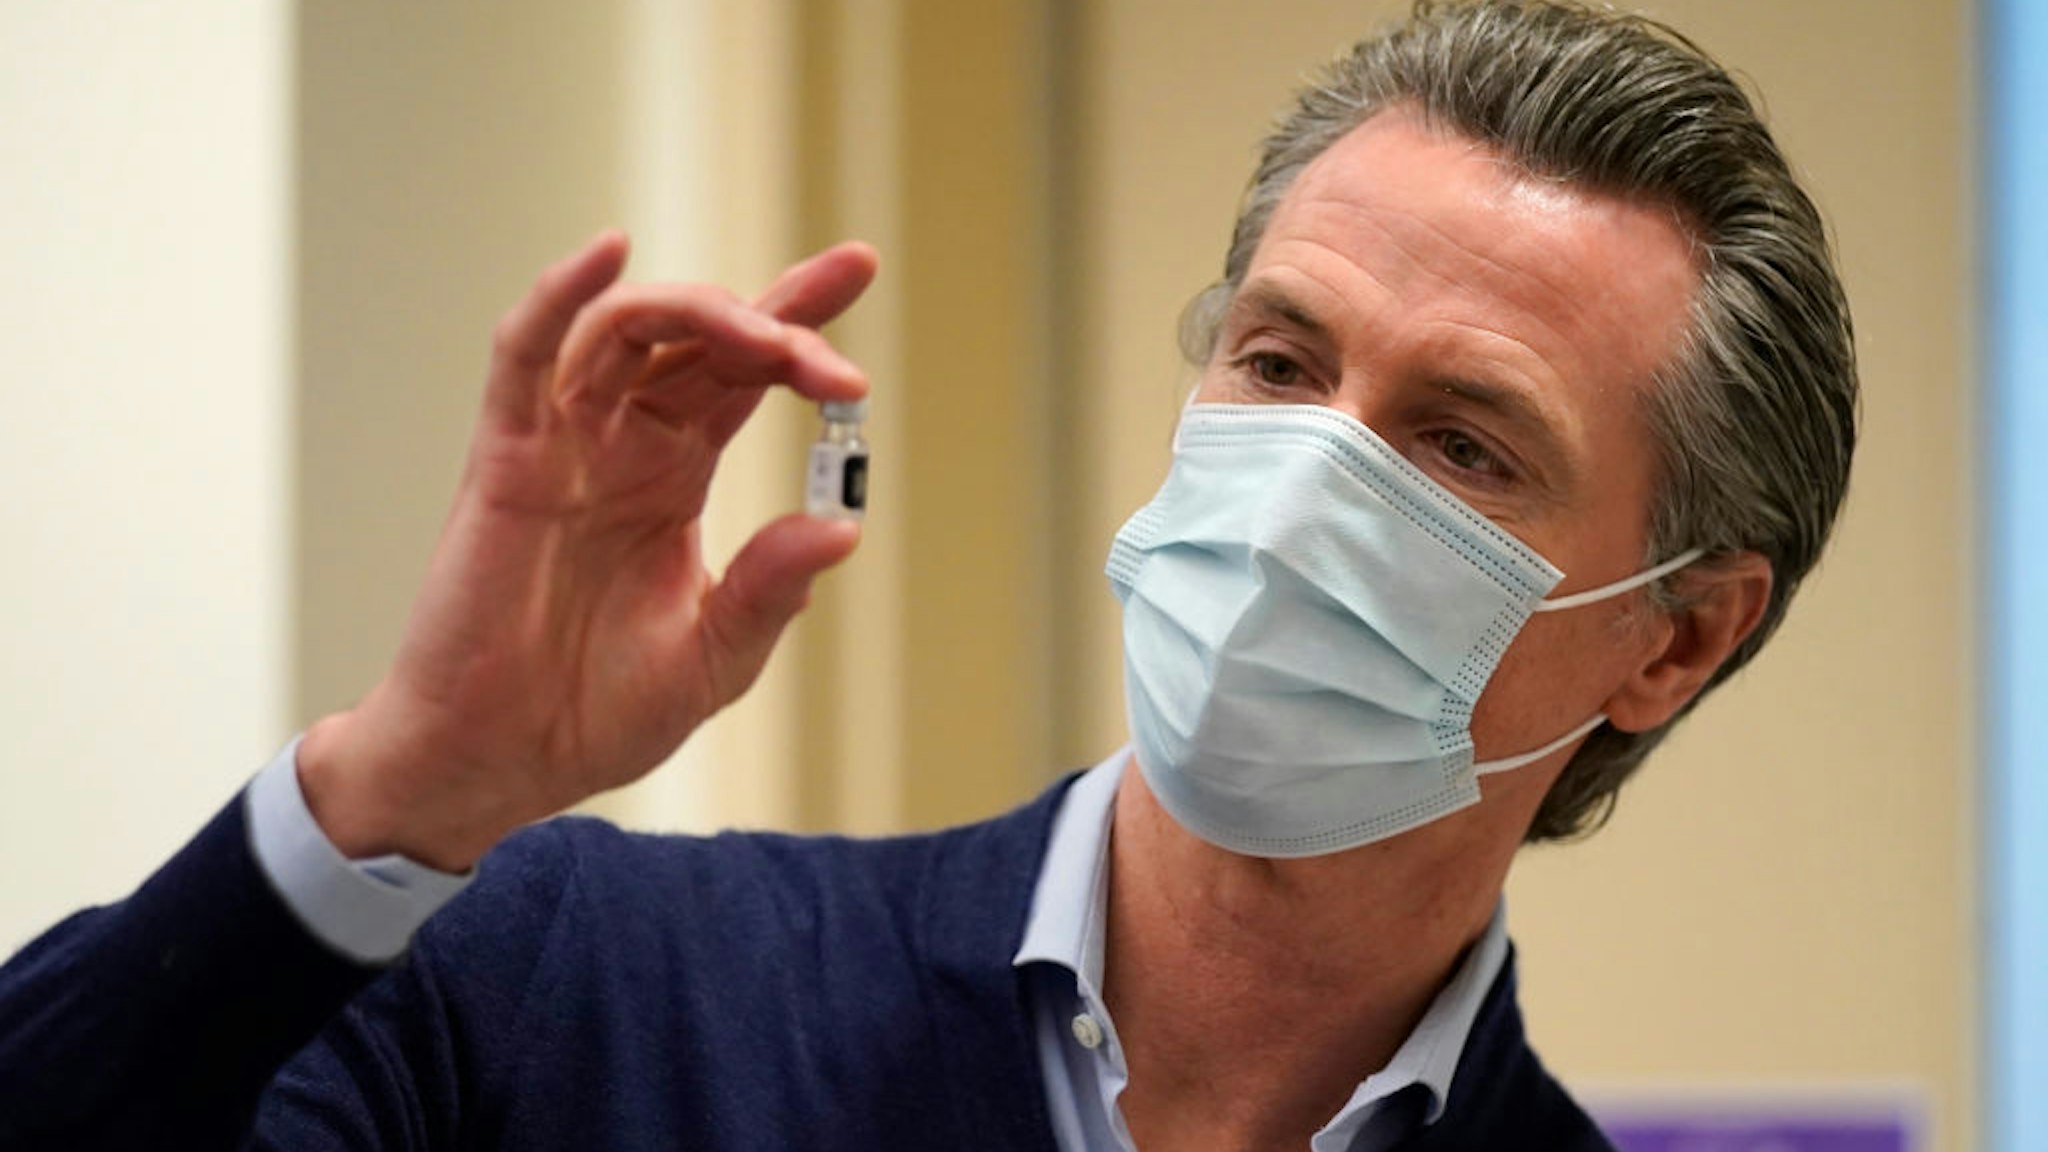 Gov. Gavin Newsom holds up a vial of the Pfizer-BioNTech COVID-19 vaccine at Kaiser Permanente Los Angeles Medical Center on December 14, 2020 in Los Angeles, California.